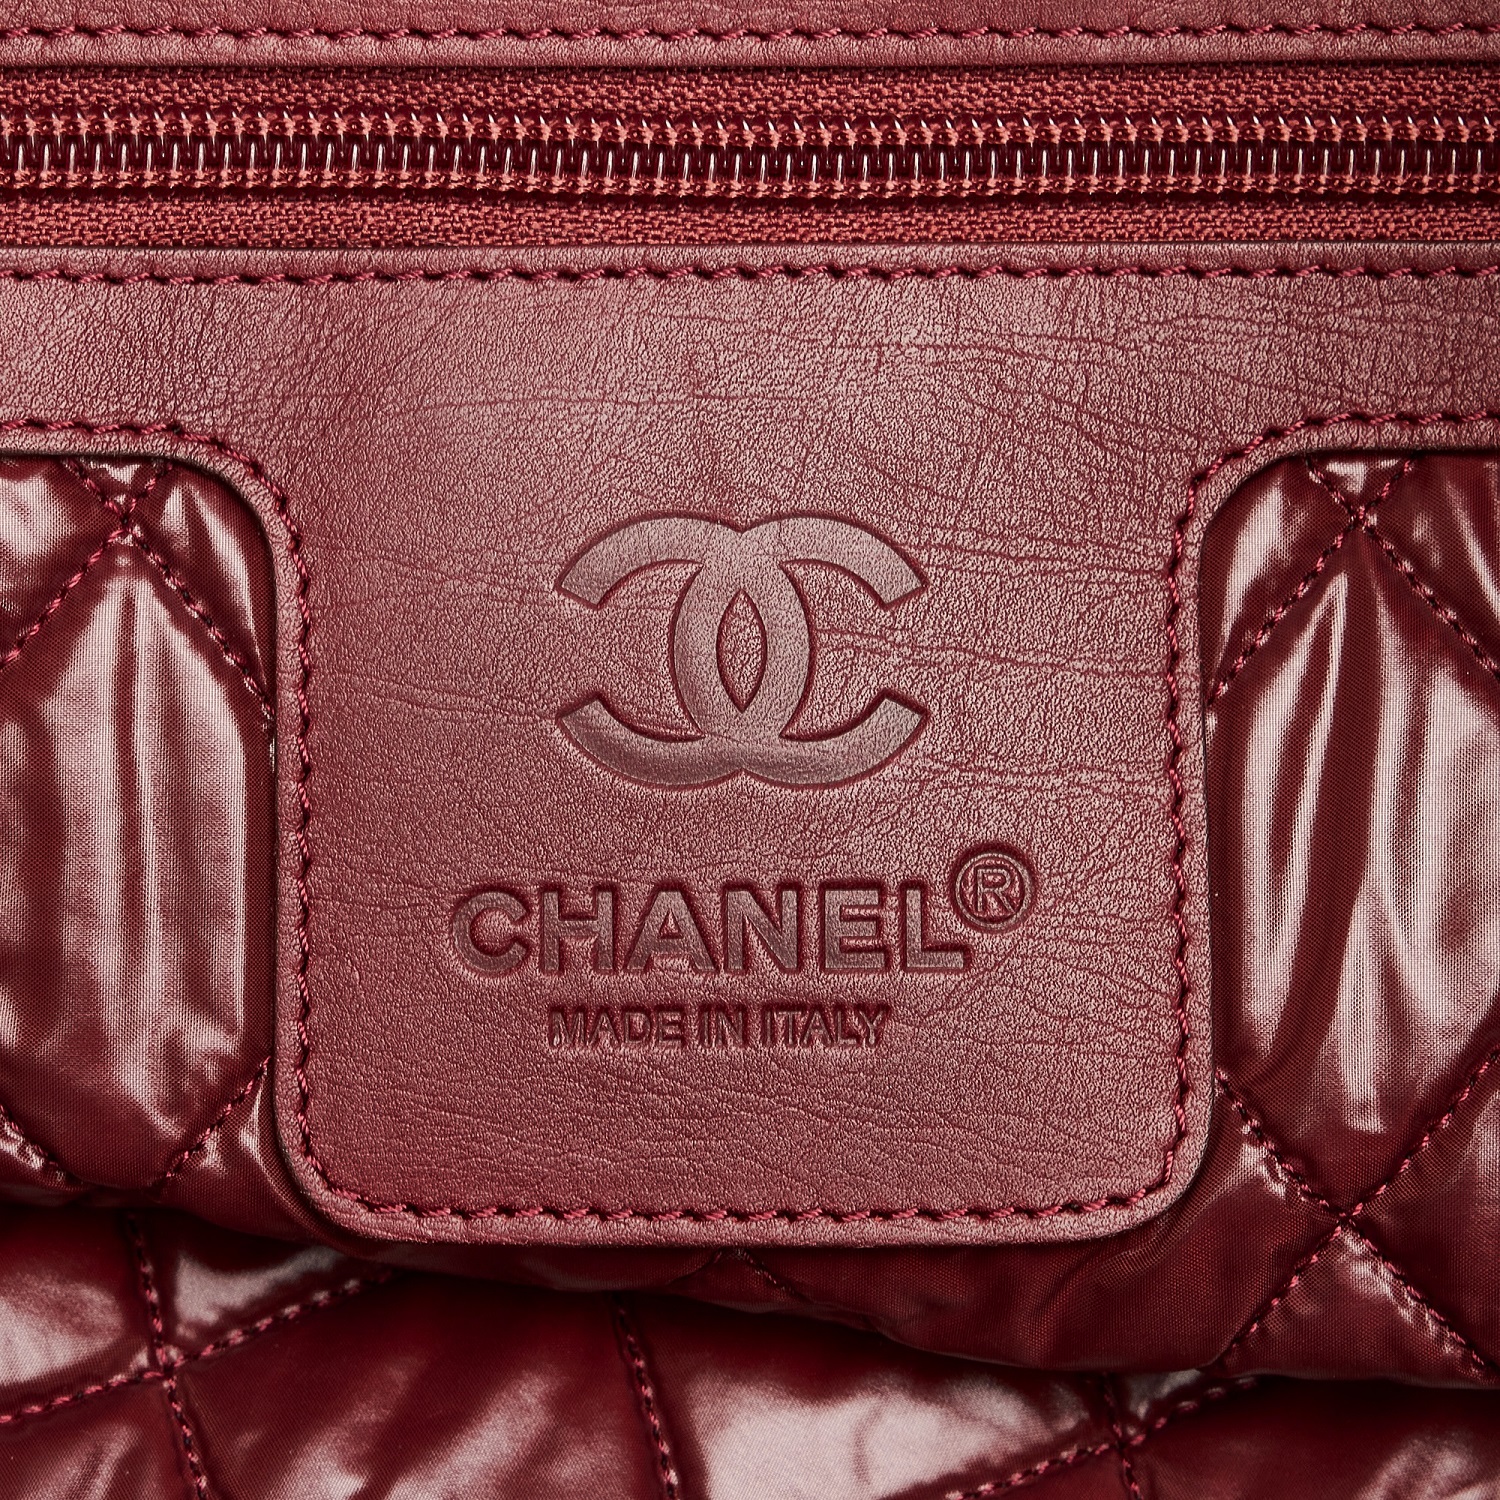 Chanel Green Coco Cocoon Travel Bag